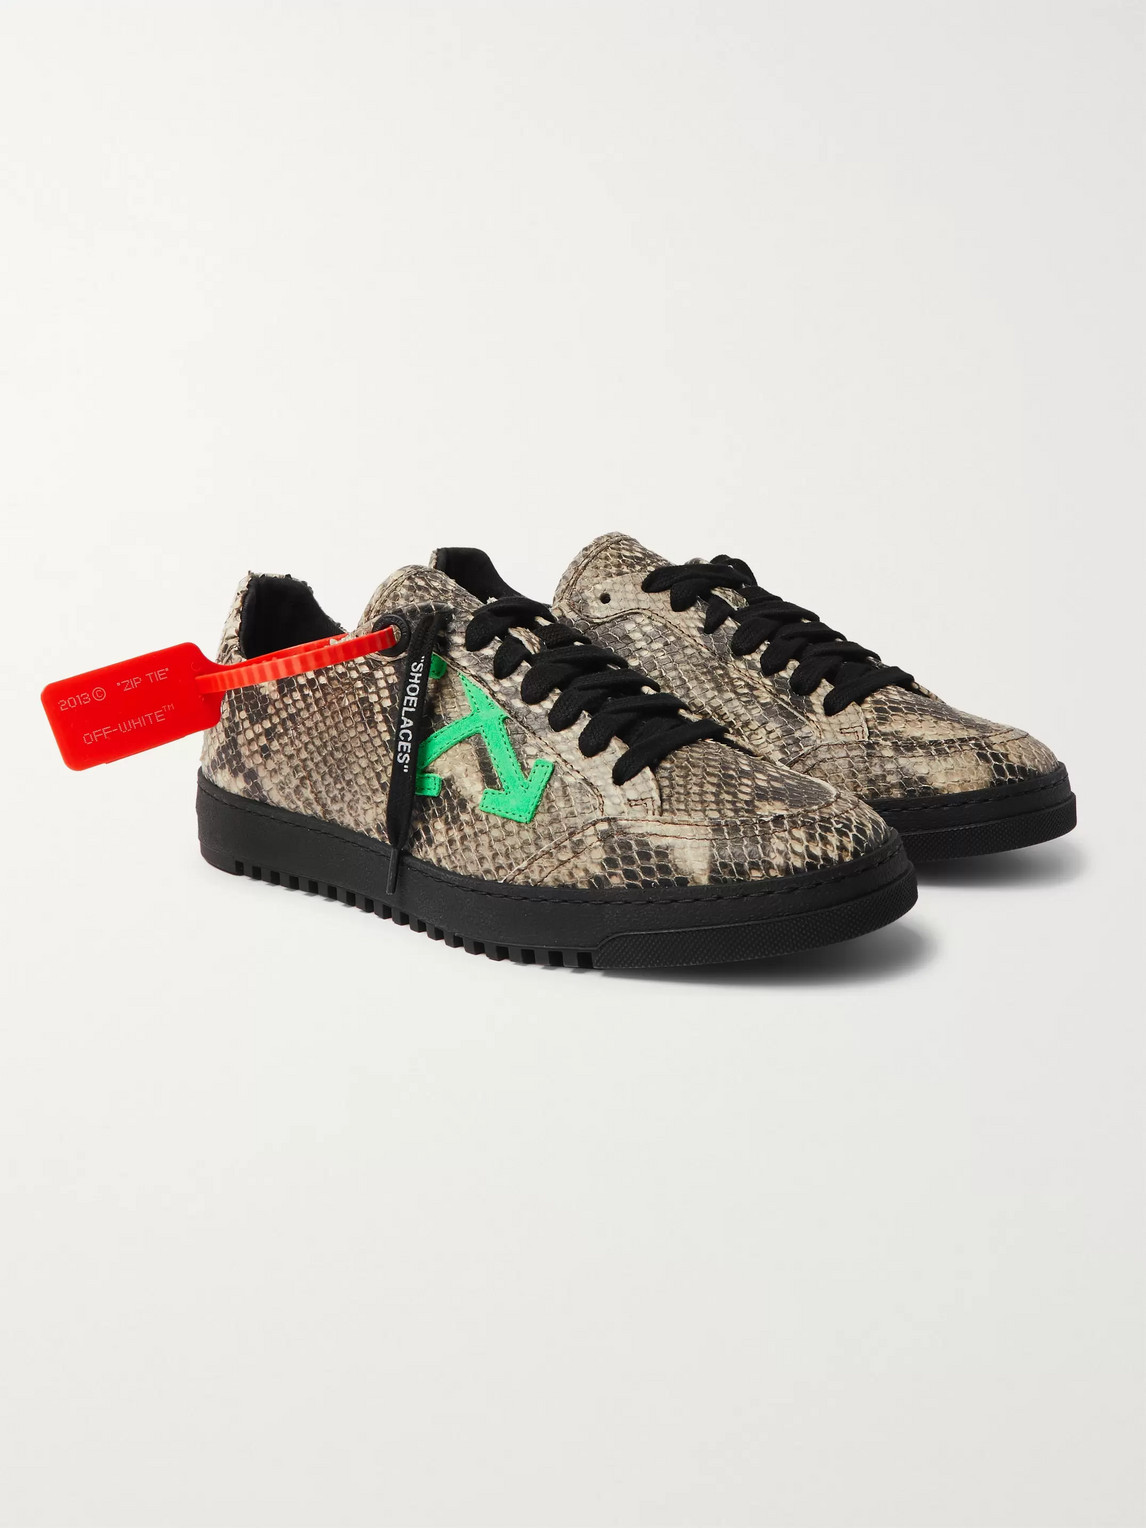 OFF-WHITE 2.0 SUEDE-TRIMMED SNAKE EFFECT-LEATHER SNEAKERS